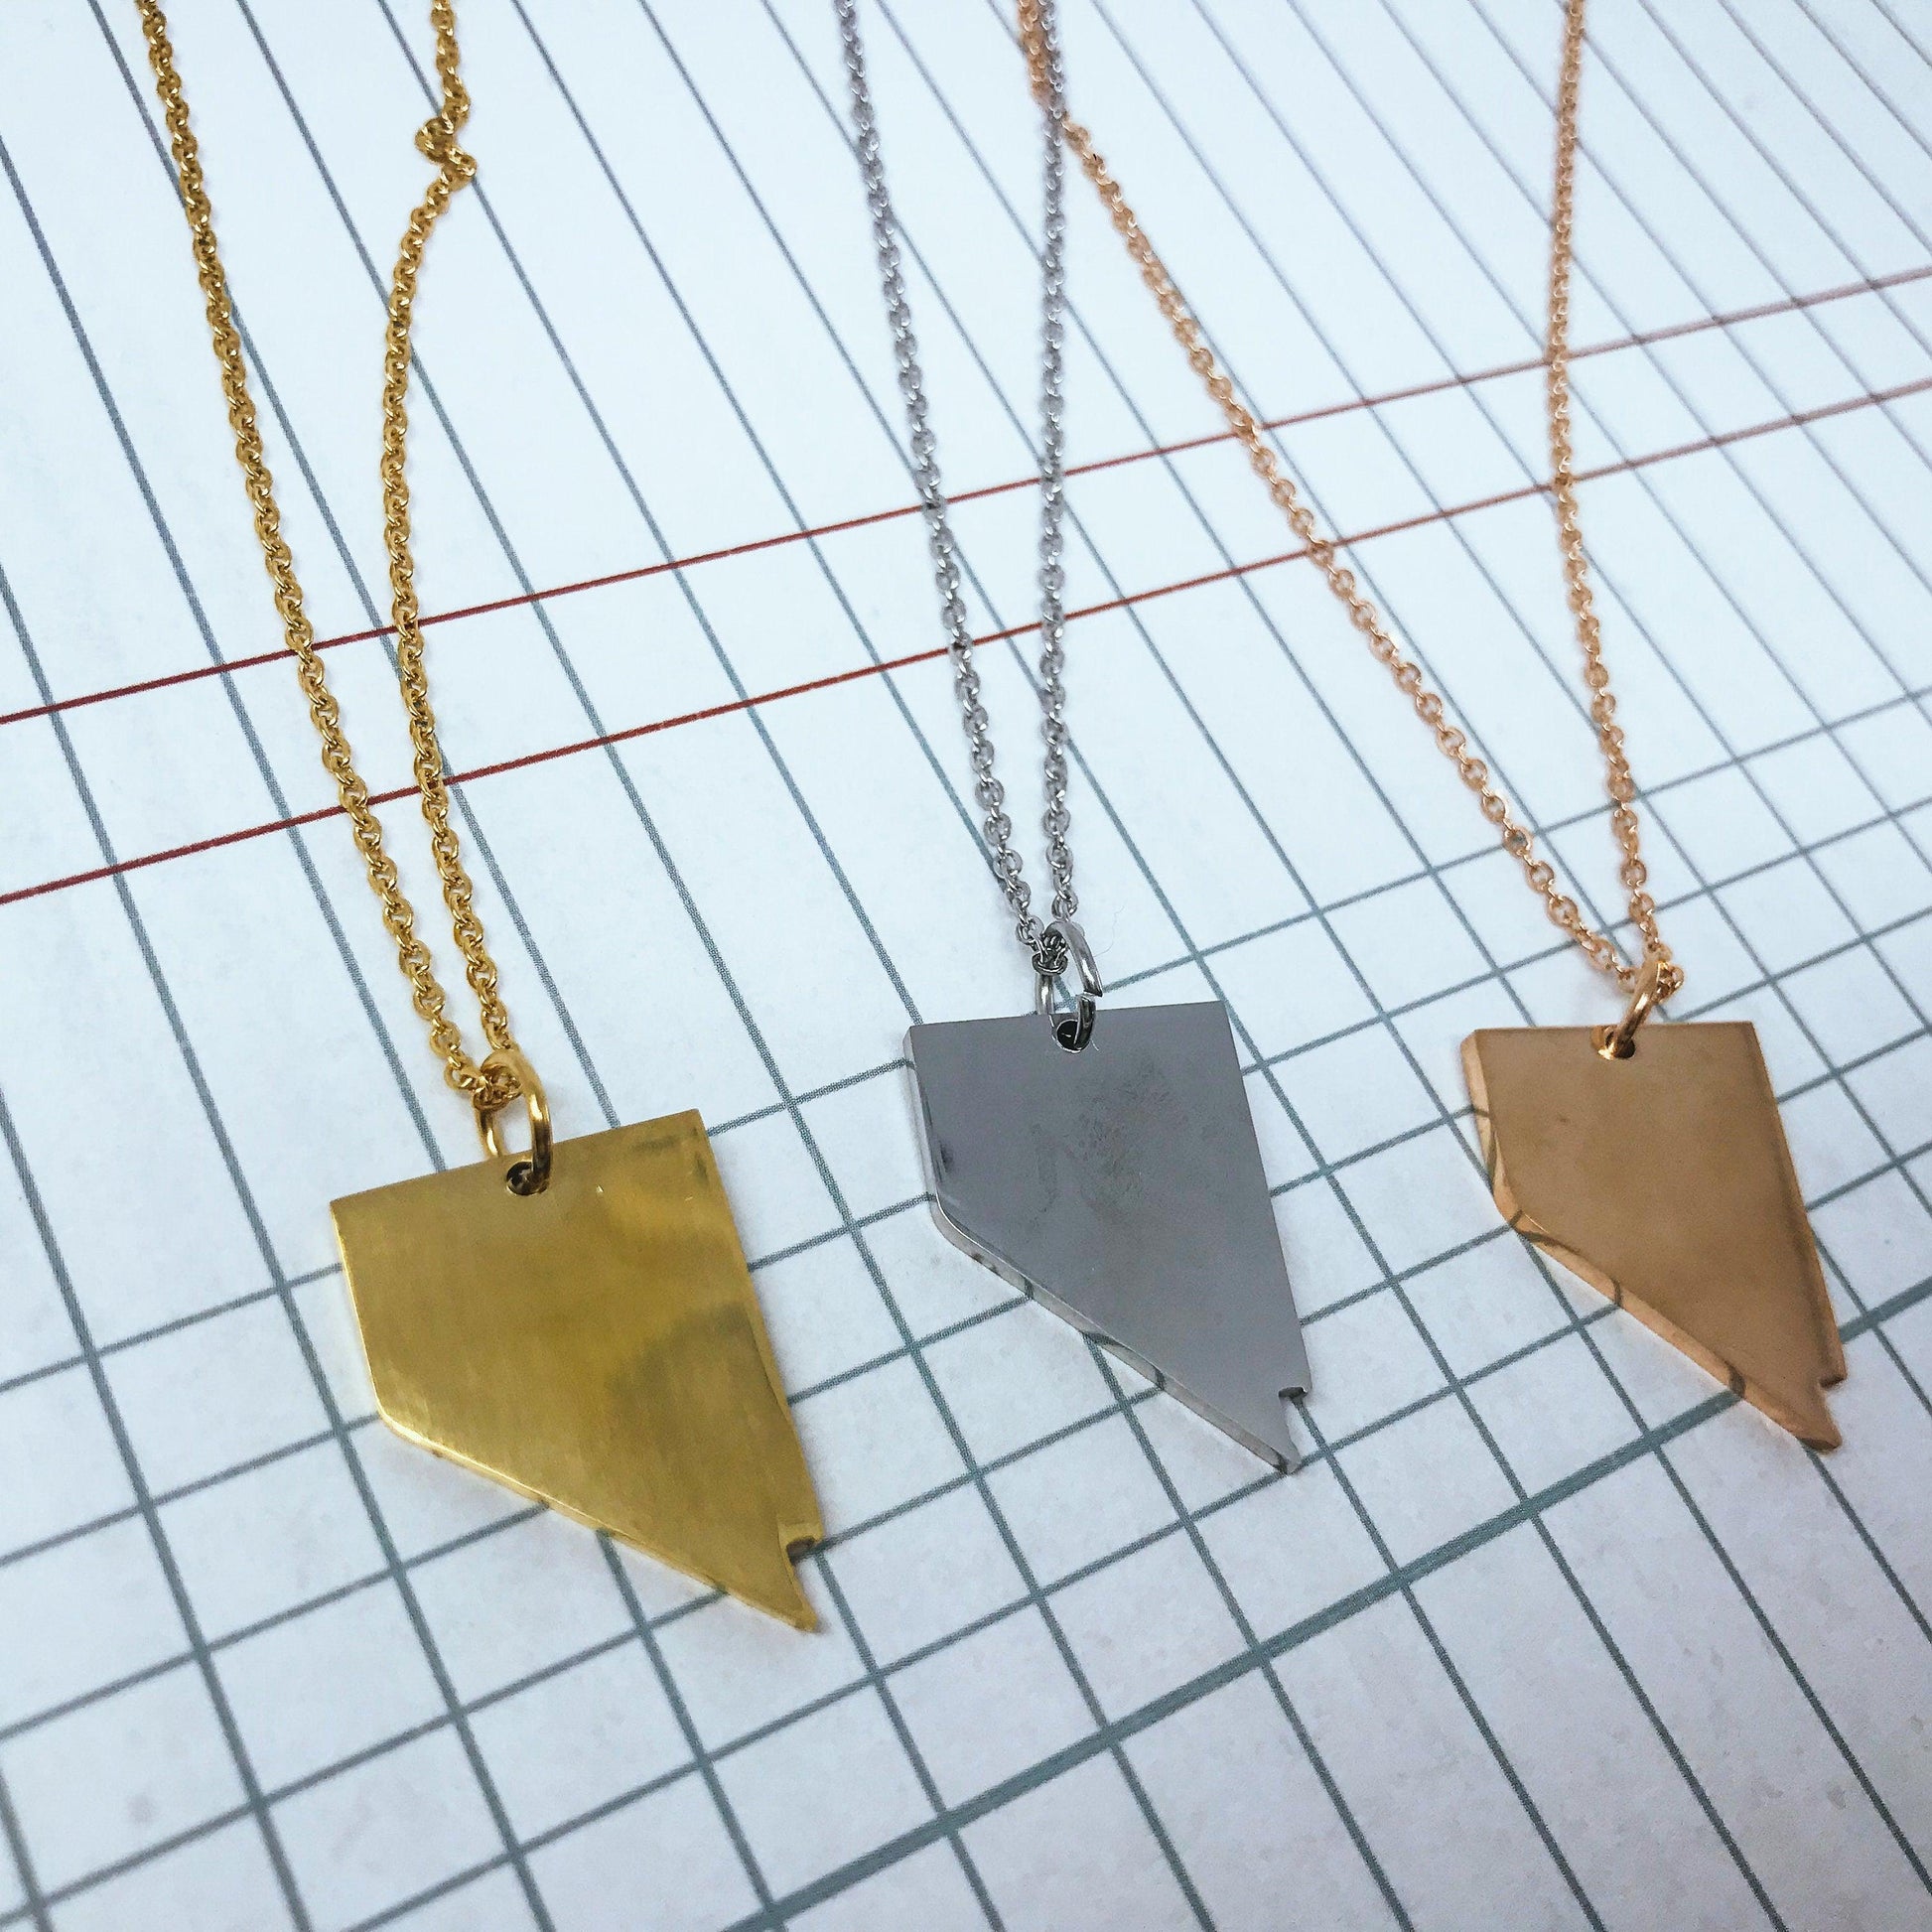 Nevada State Silhouette Necklaces in 3 different colors: Gold, Silver & Rose Gold